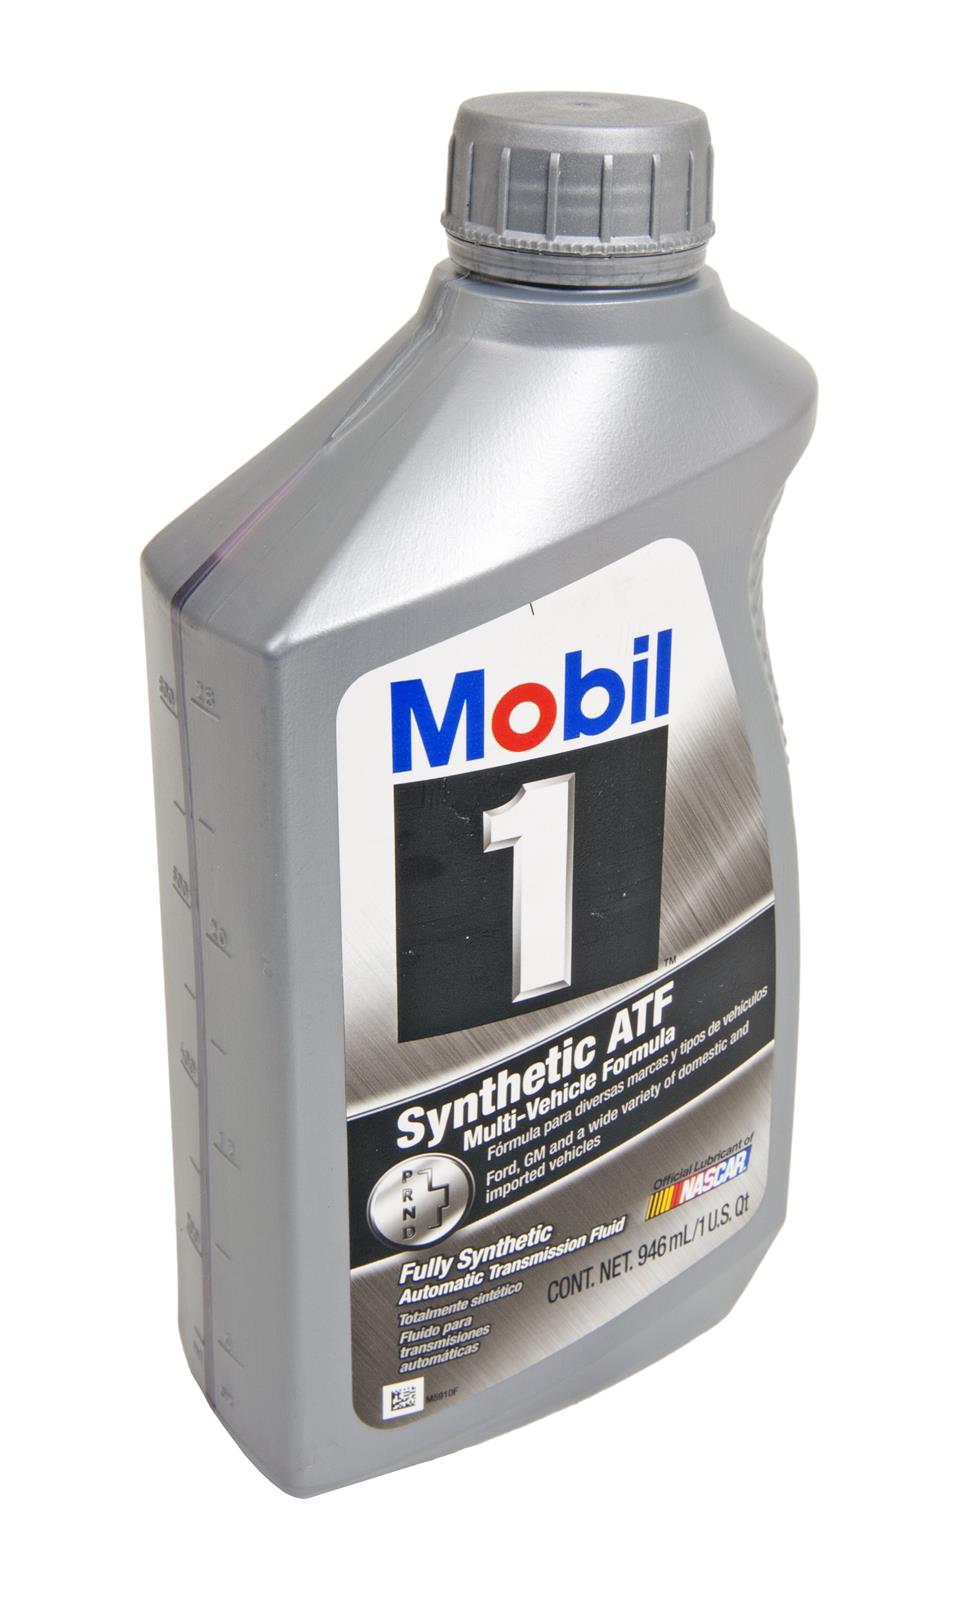 Mobil 1 Synthetic ATF. Mobil 1 Synthetic ATF В бочка. Мобиле 1тм синтетическое АТФ.